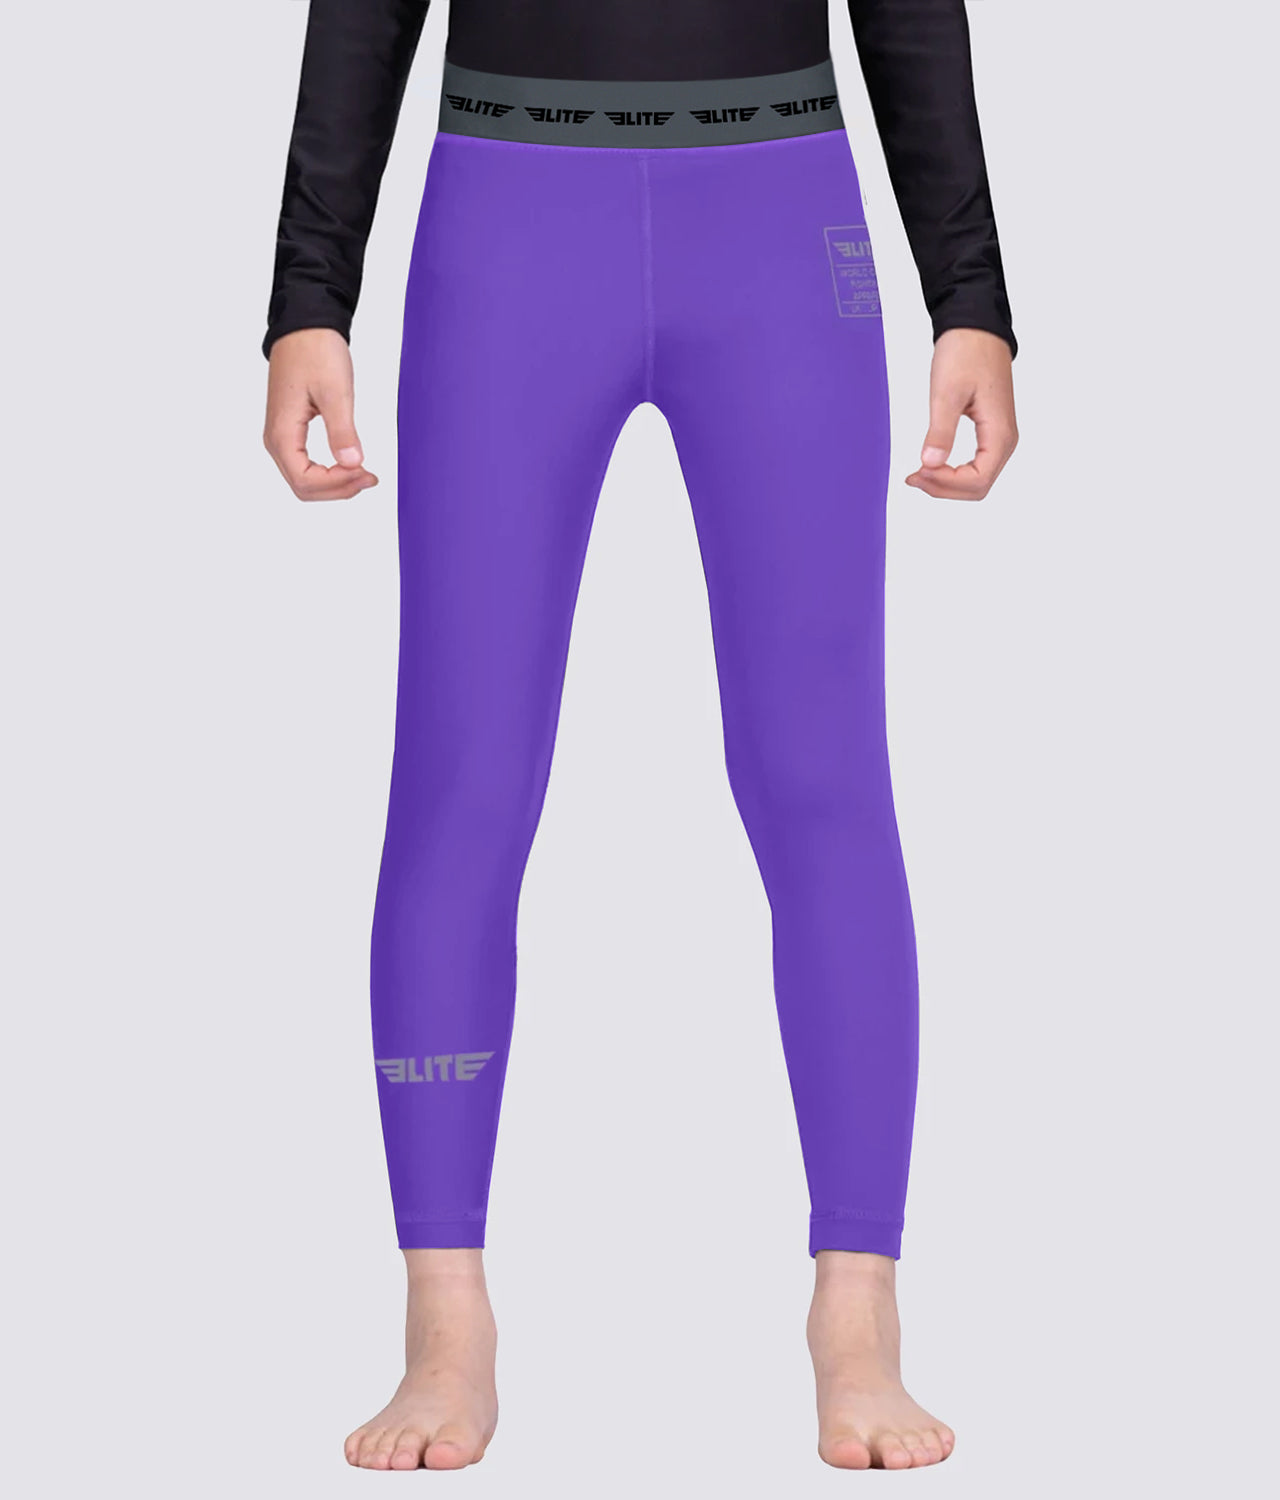 Review of Elite Sports' Women's Compression Leggings (Spats)